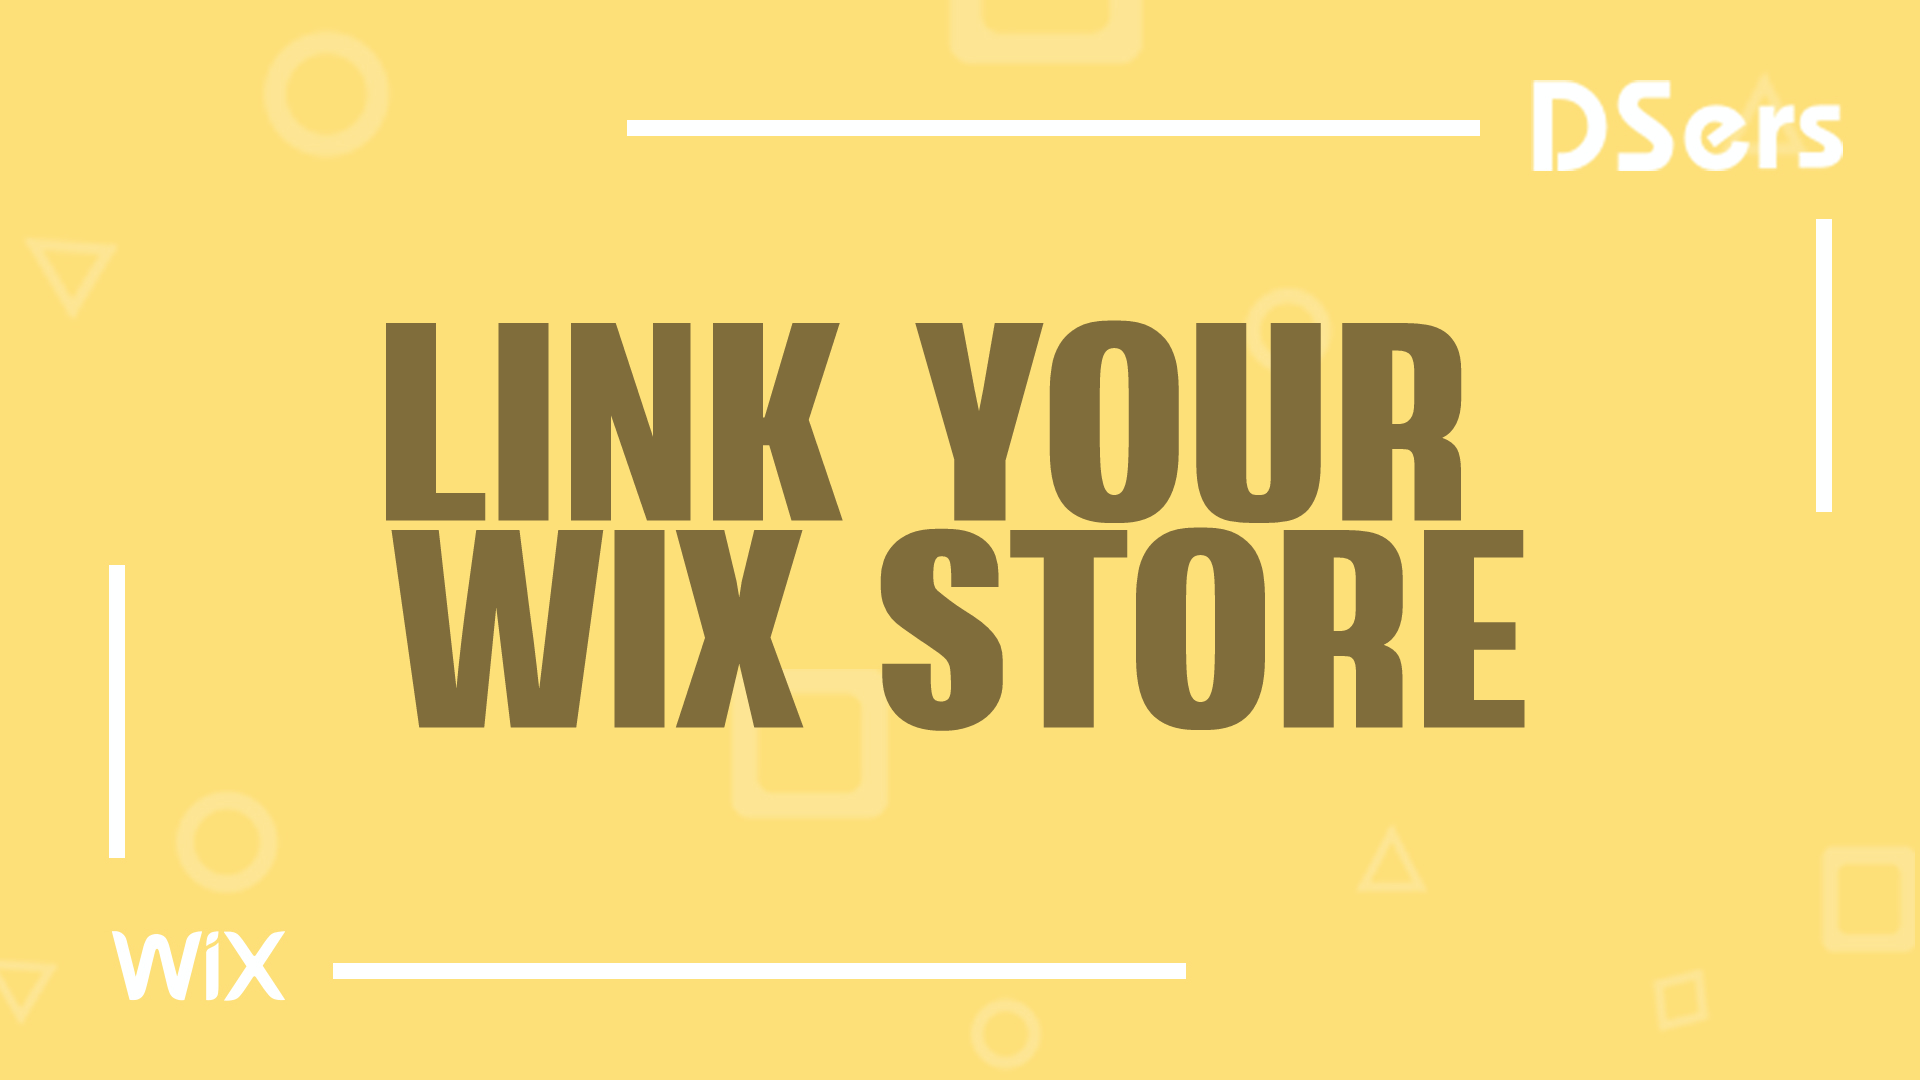 Link your Wix store